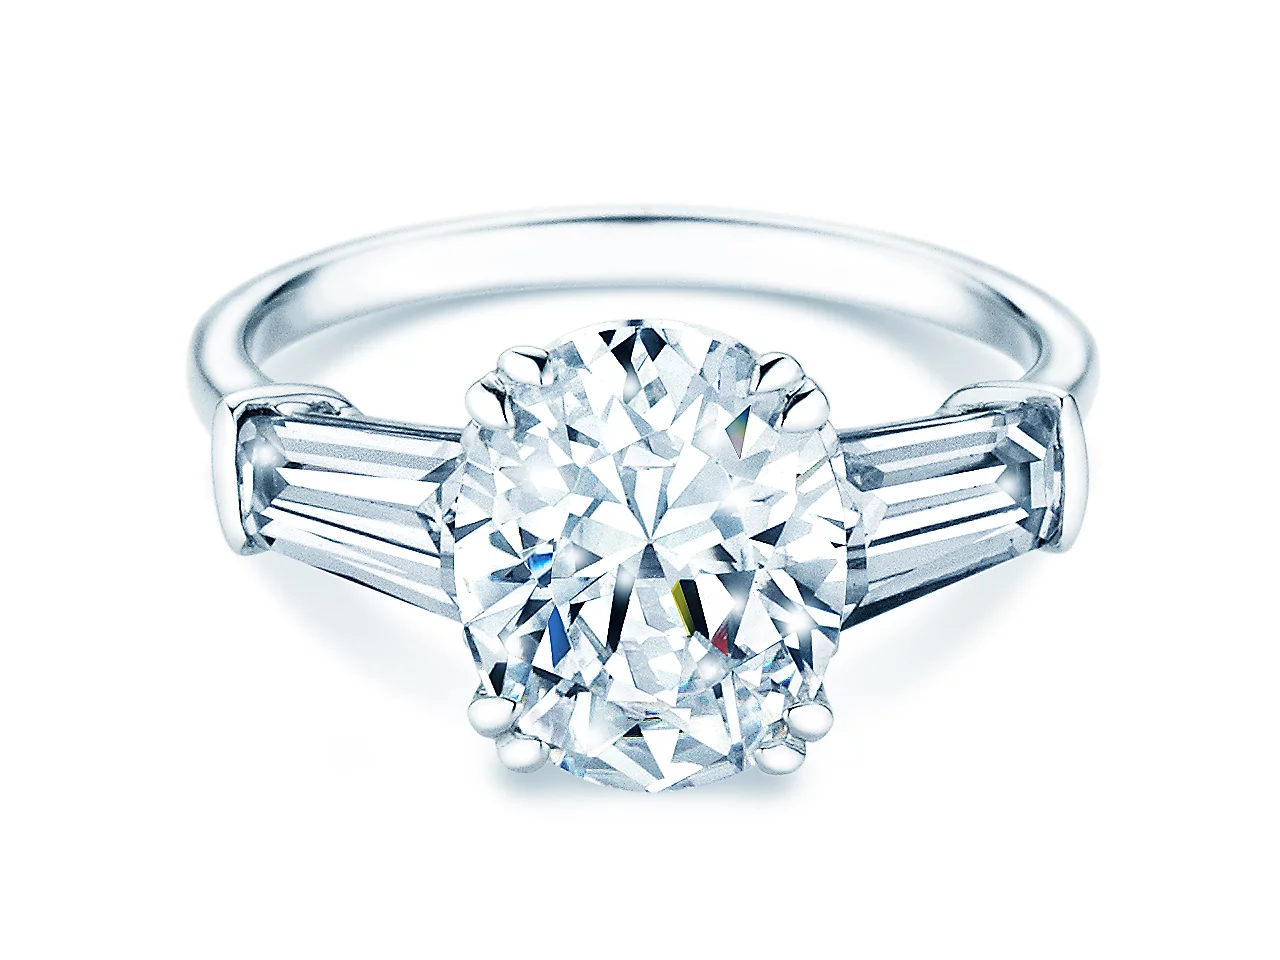 Ethical Diamond Engagement Rings - Barry's Jeweller